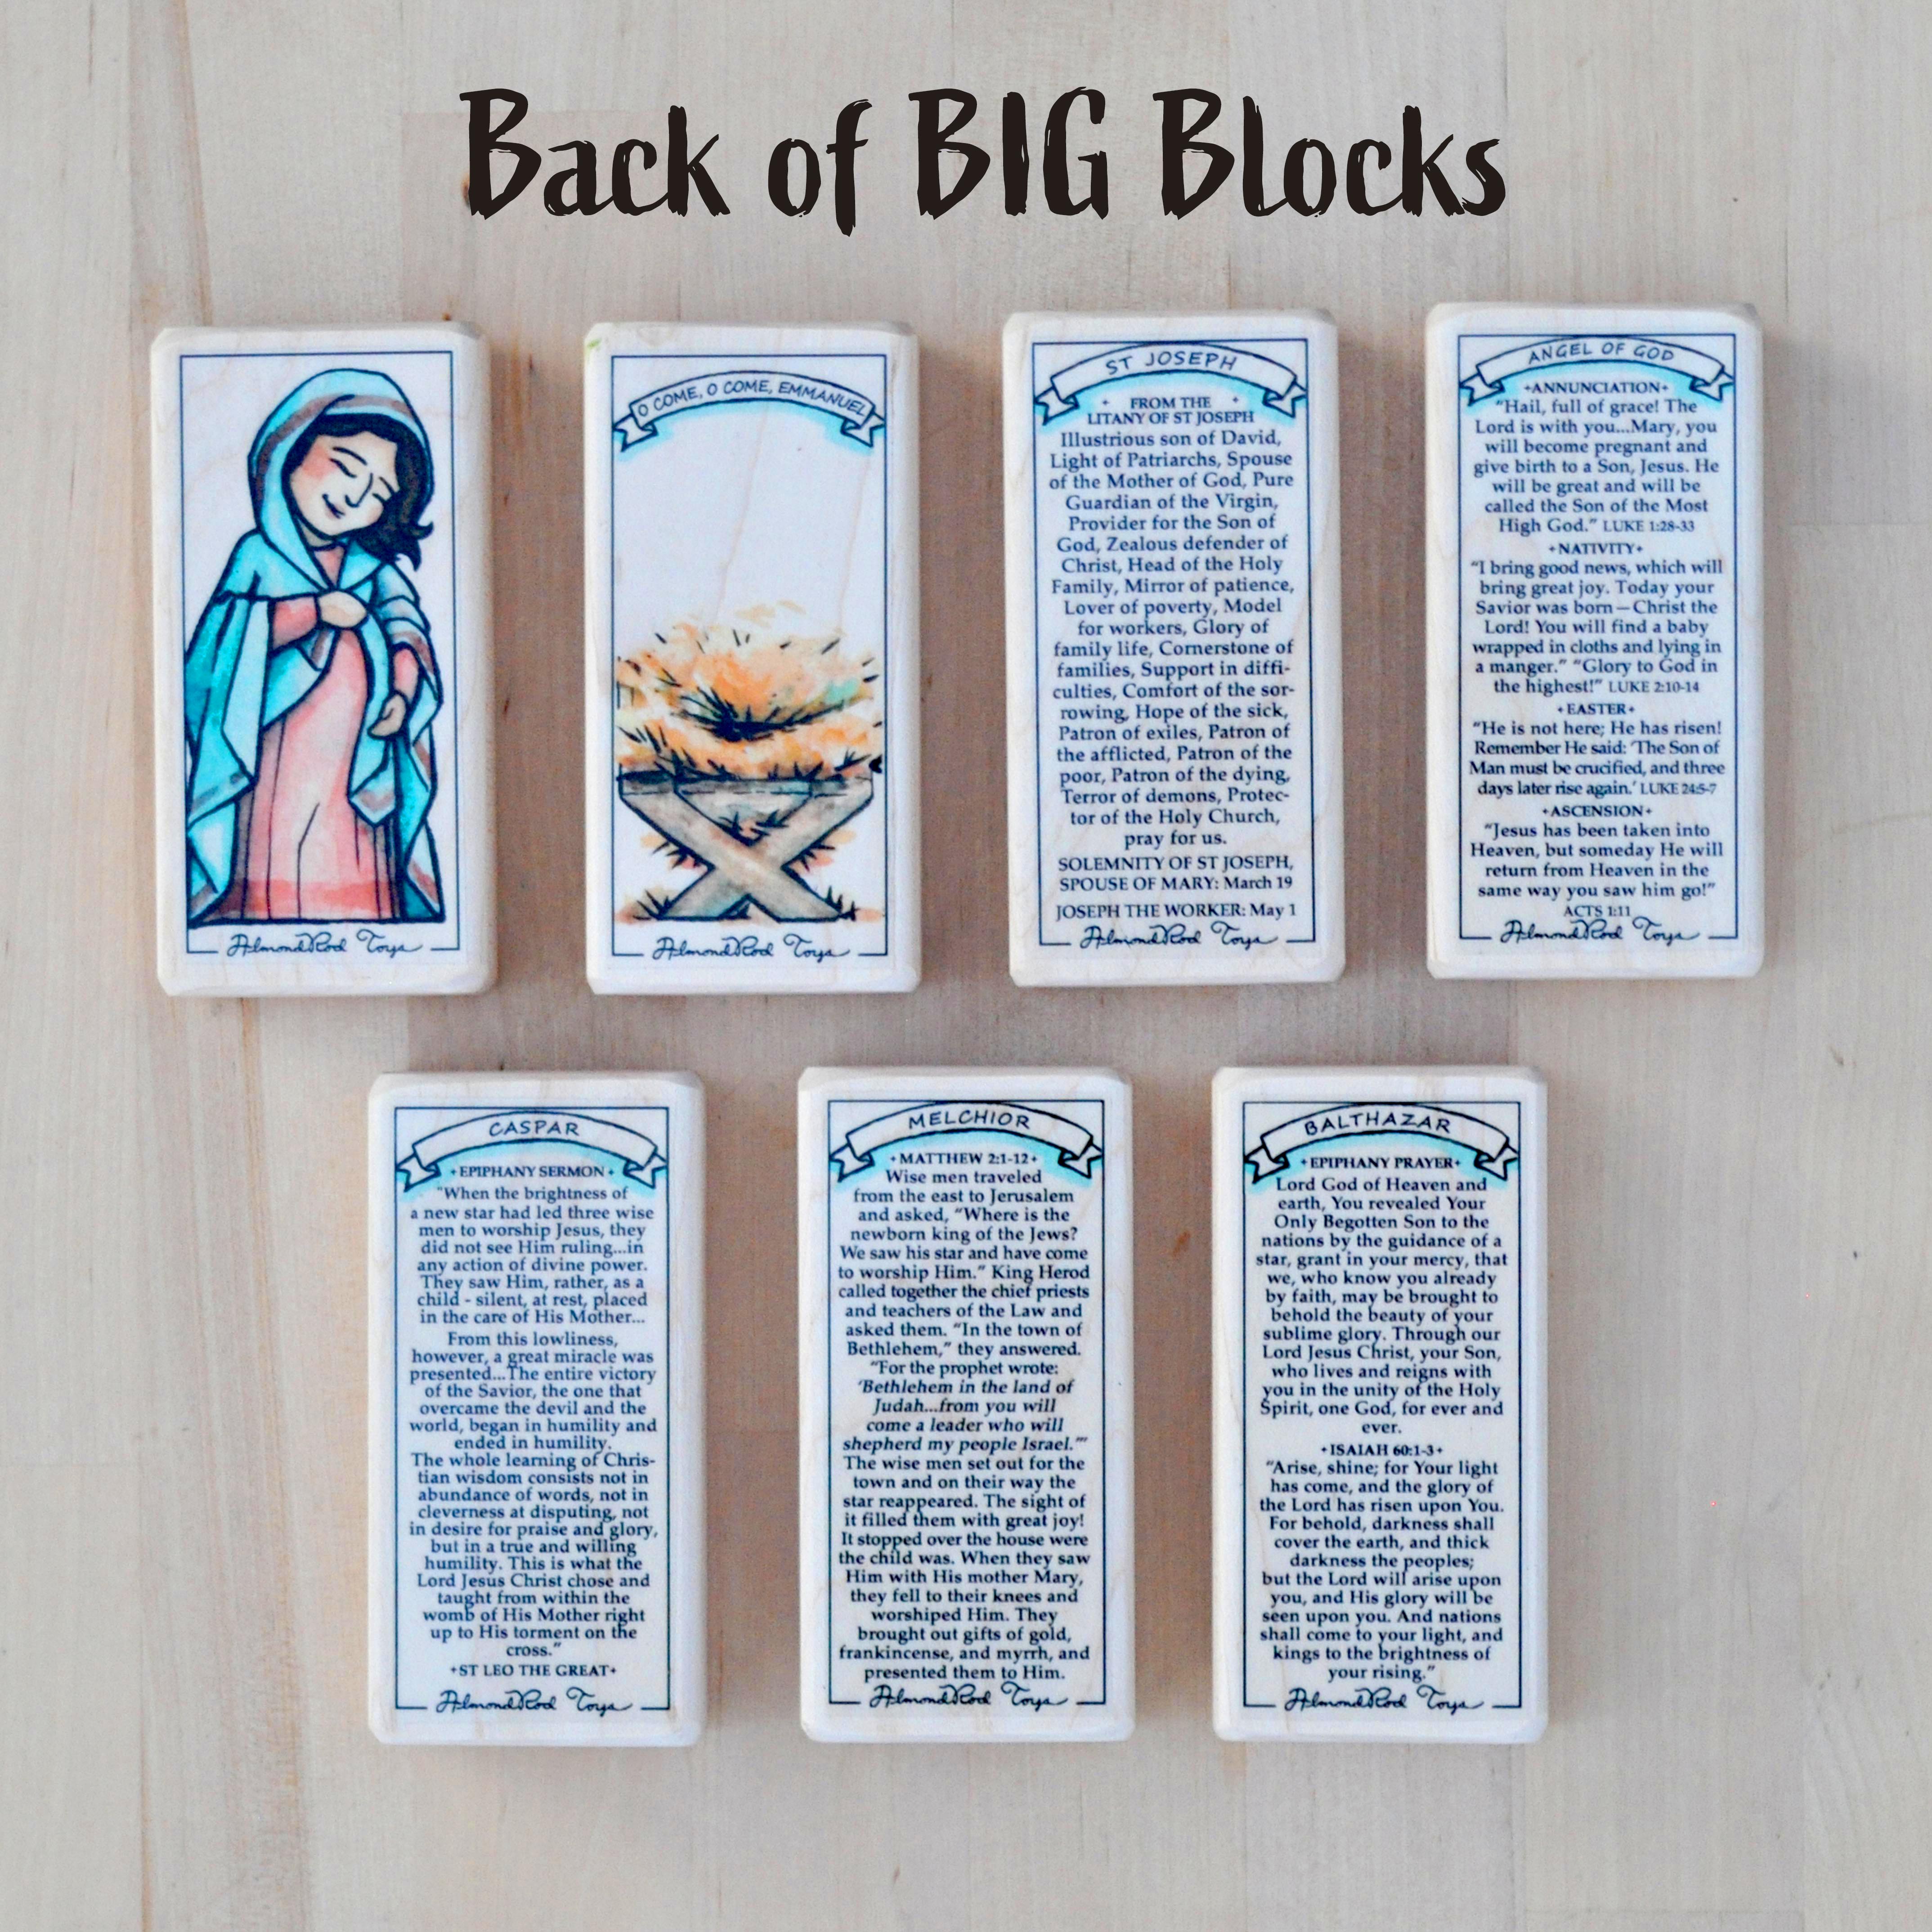 NEW Christmas Story BIG Block Set // Heavy Duty Nativity for all ages